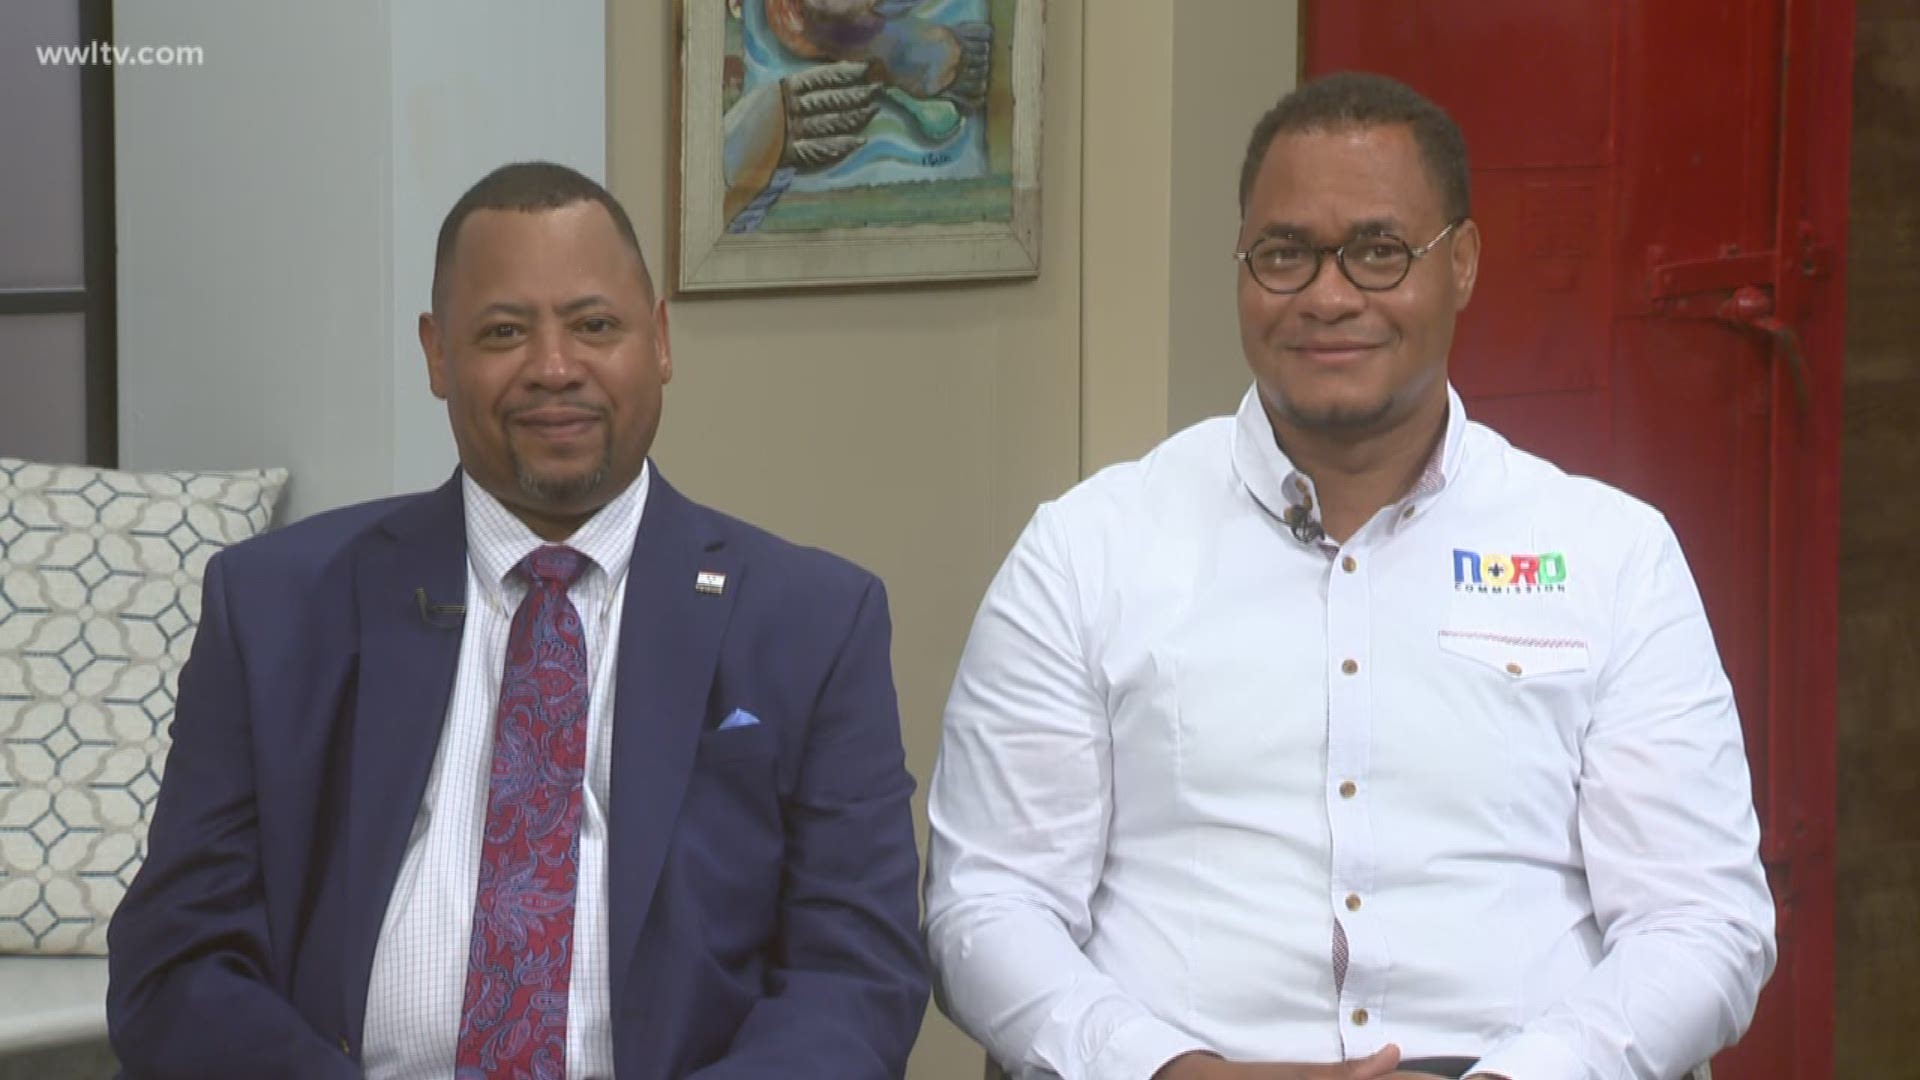 "The First Gentleman" of New Orleans Jason Cantrell and CEO of NORD Larry Barabino is in with details on a great event  celebrating all fathers ahead of the big holiday.